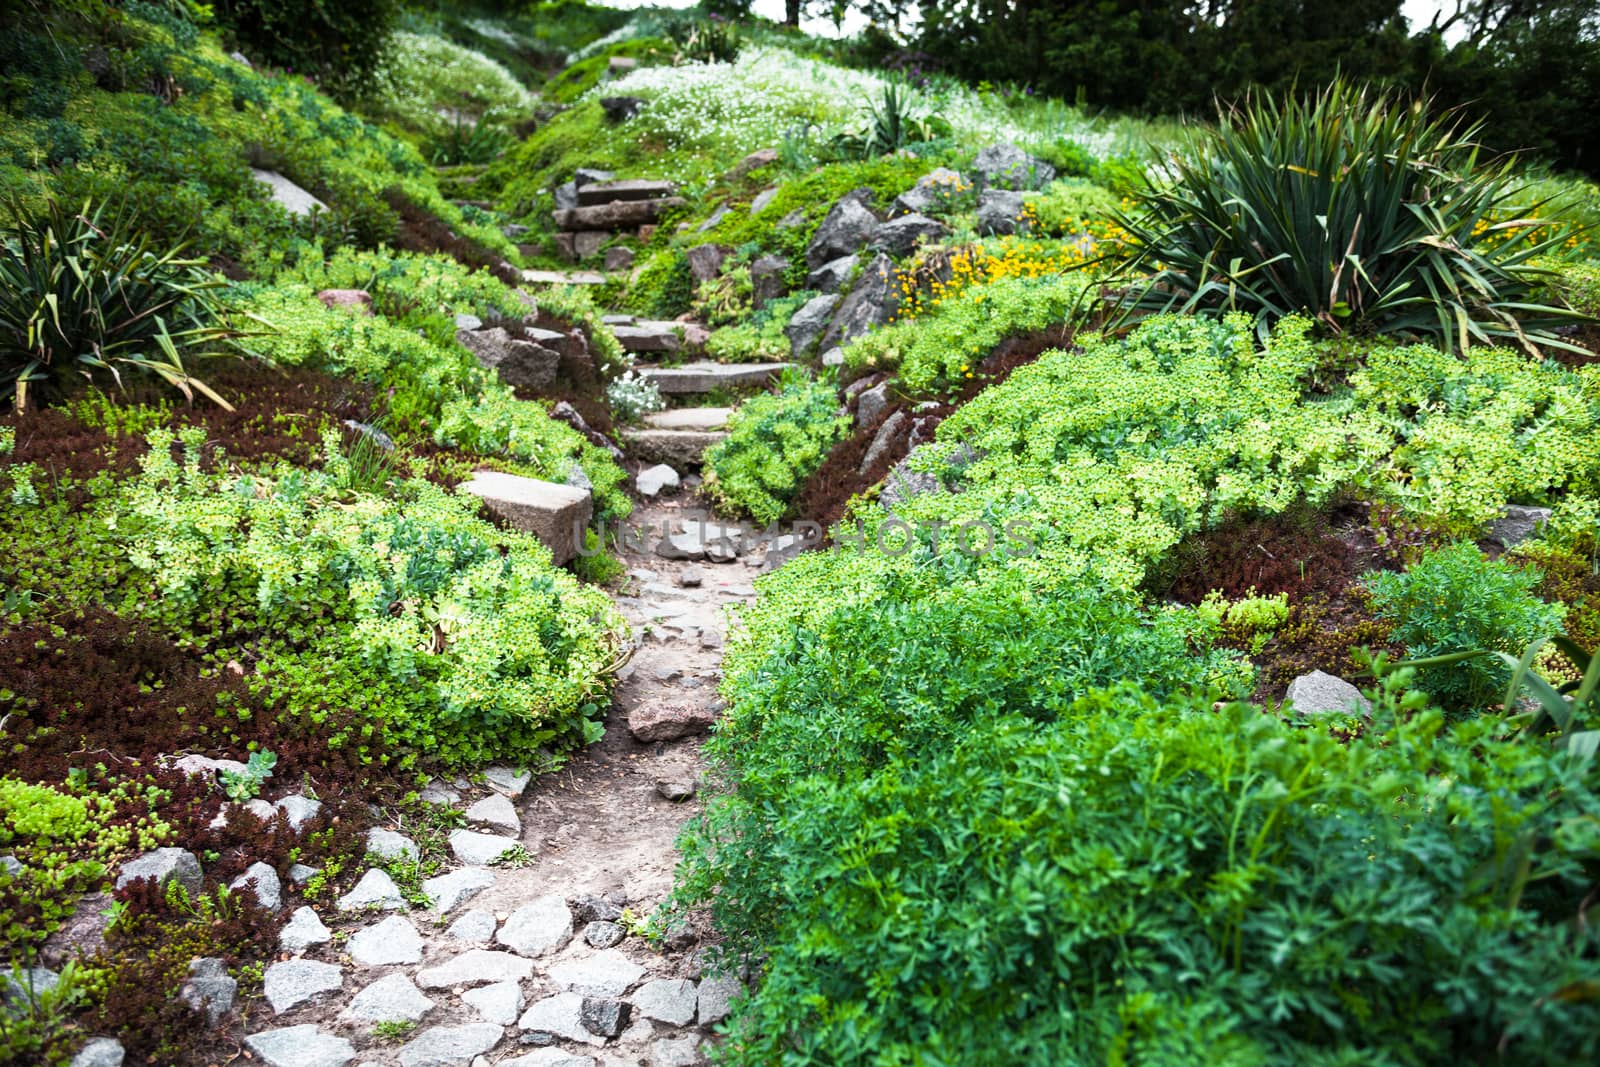 Stony path and stairs in the green blooming garden.